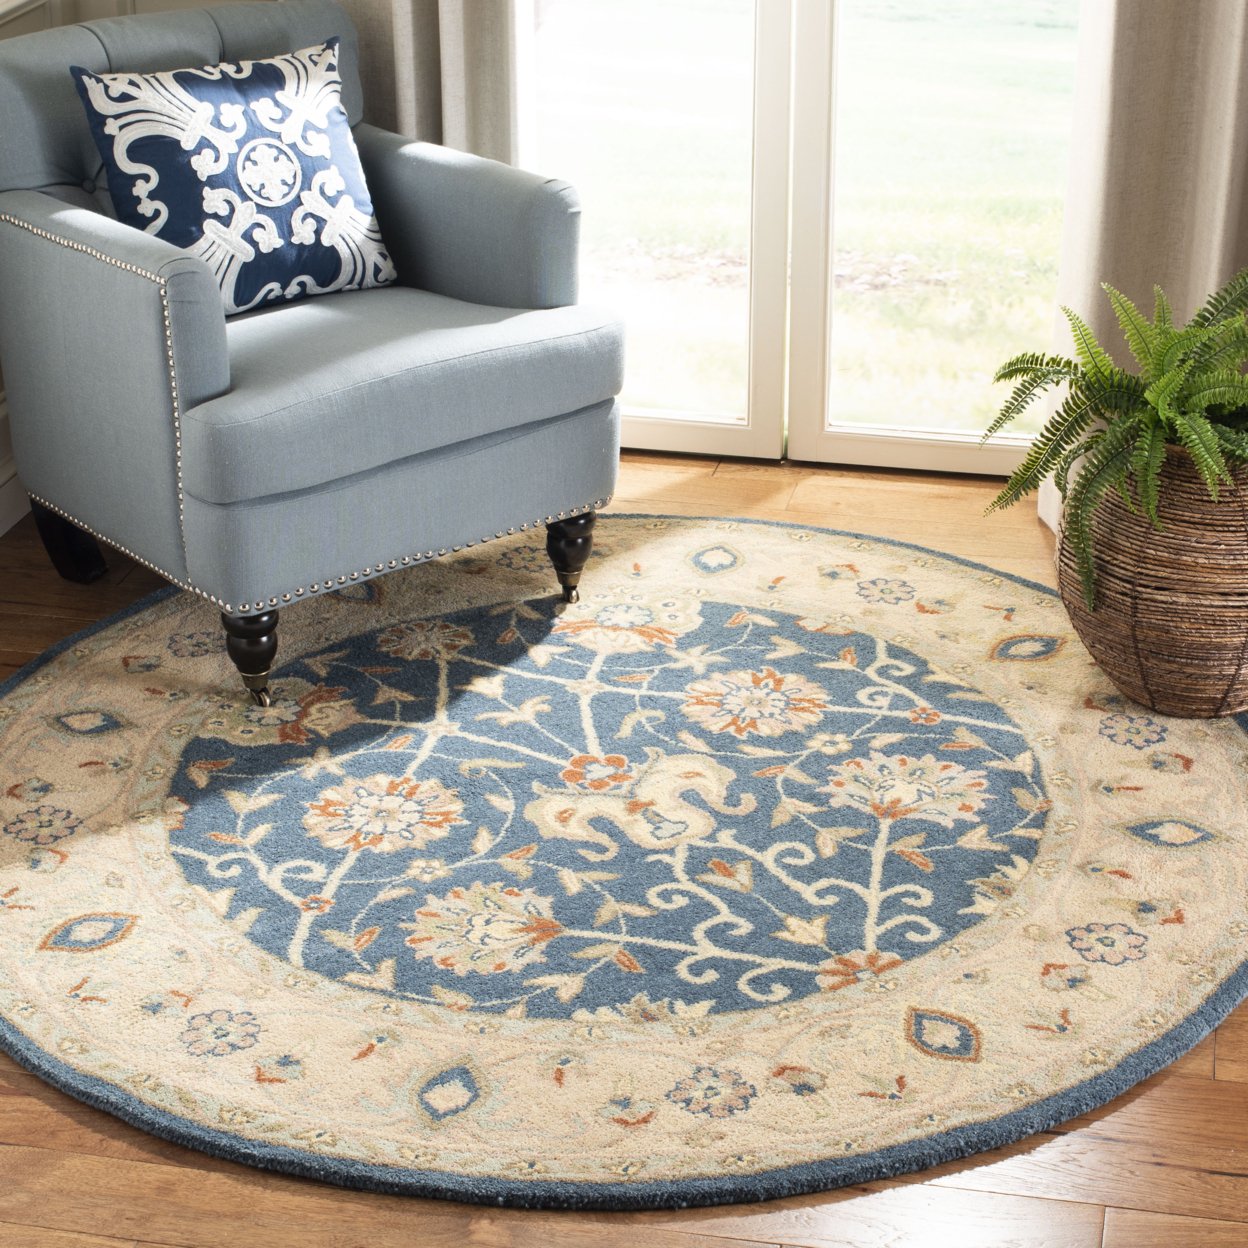 SAFAVIEH Antiquity Collection AT21E Handmade Blue Rug - 6' Round